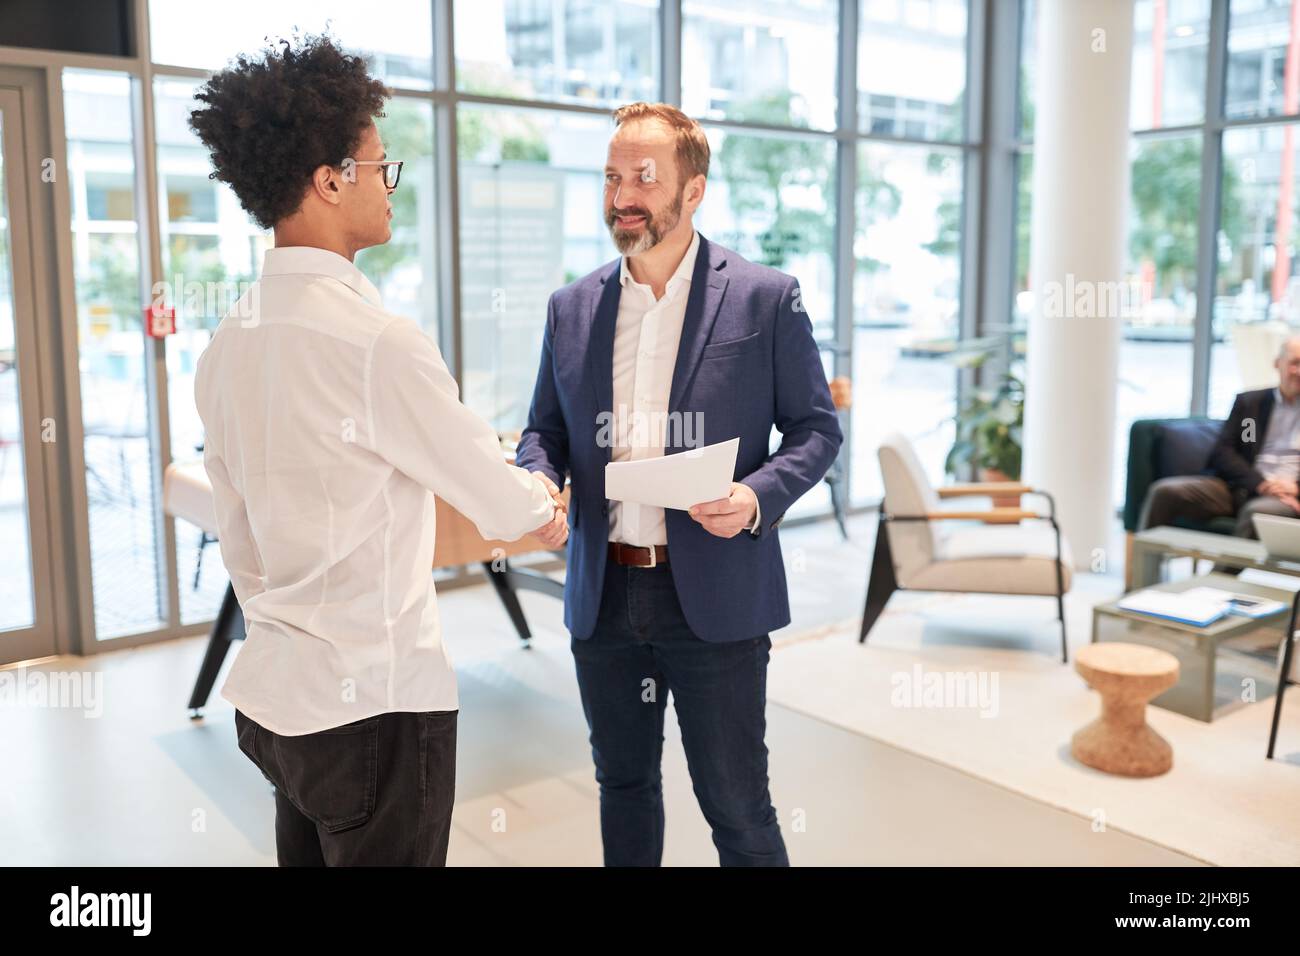 Two business people shaking hands in greeting and for good cooperation Stock Photo